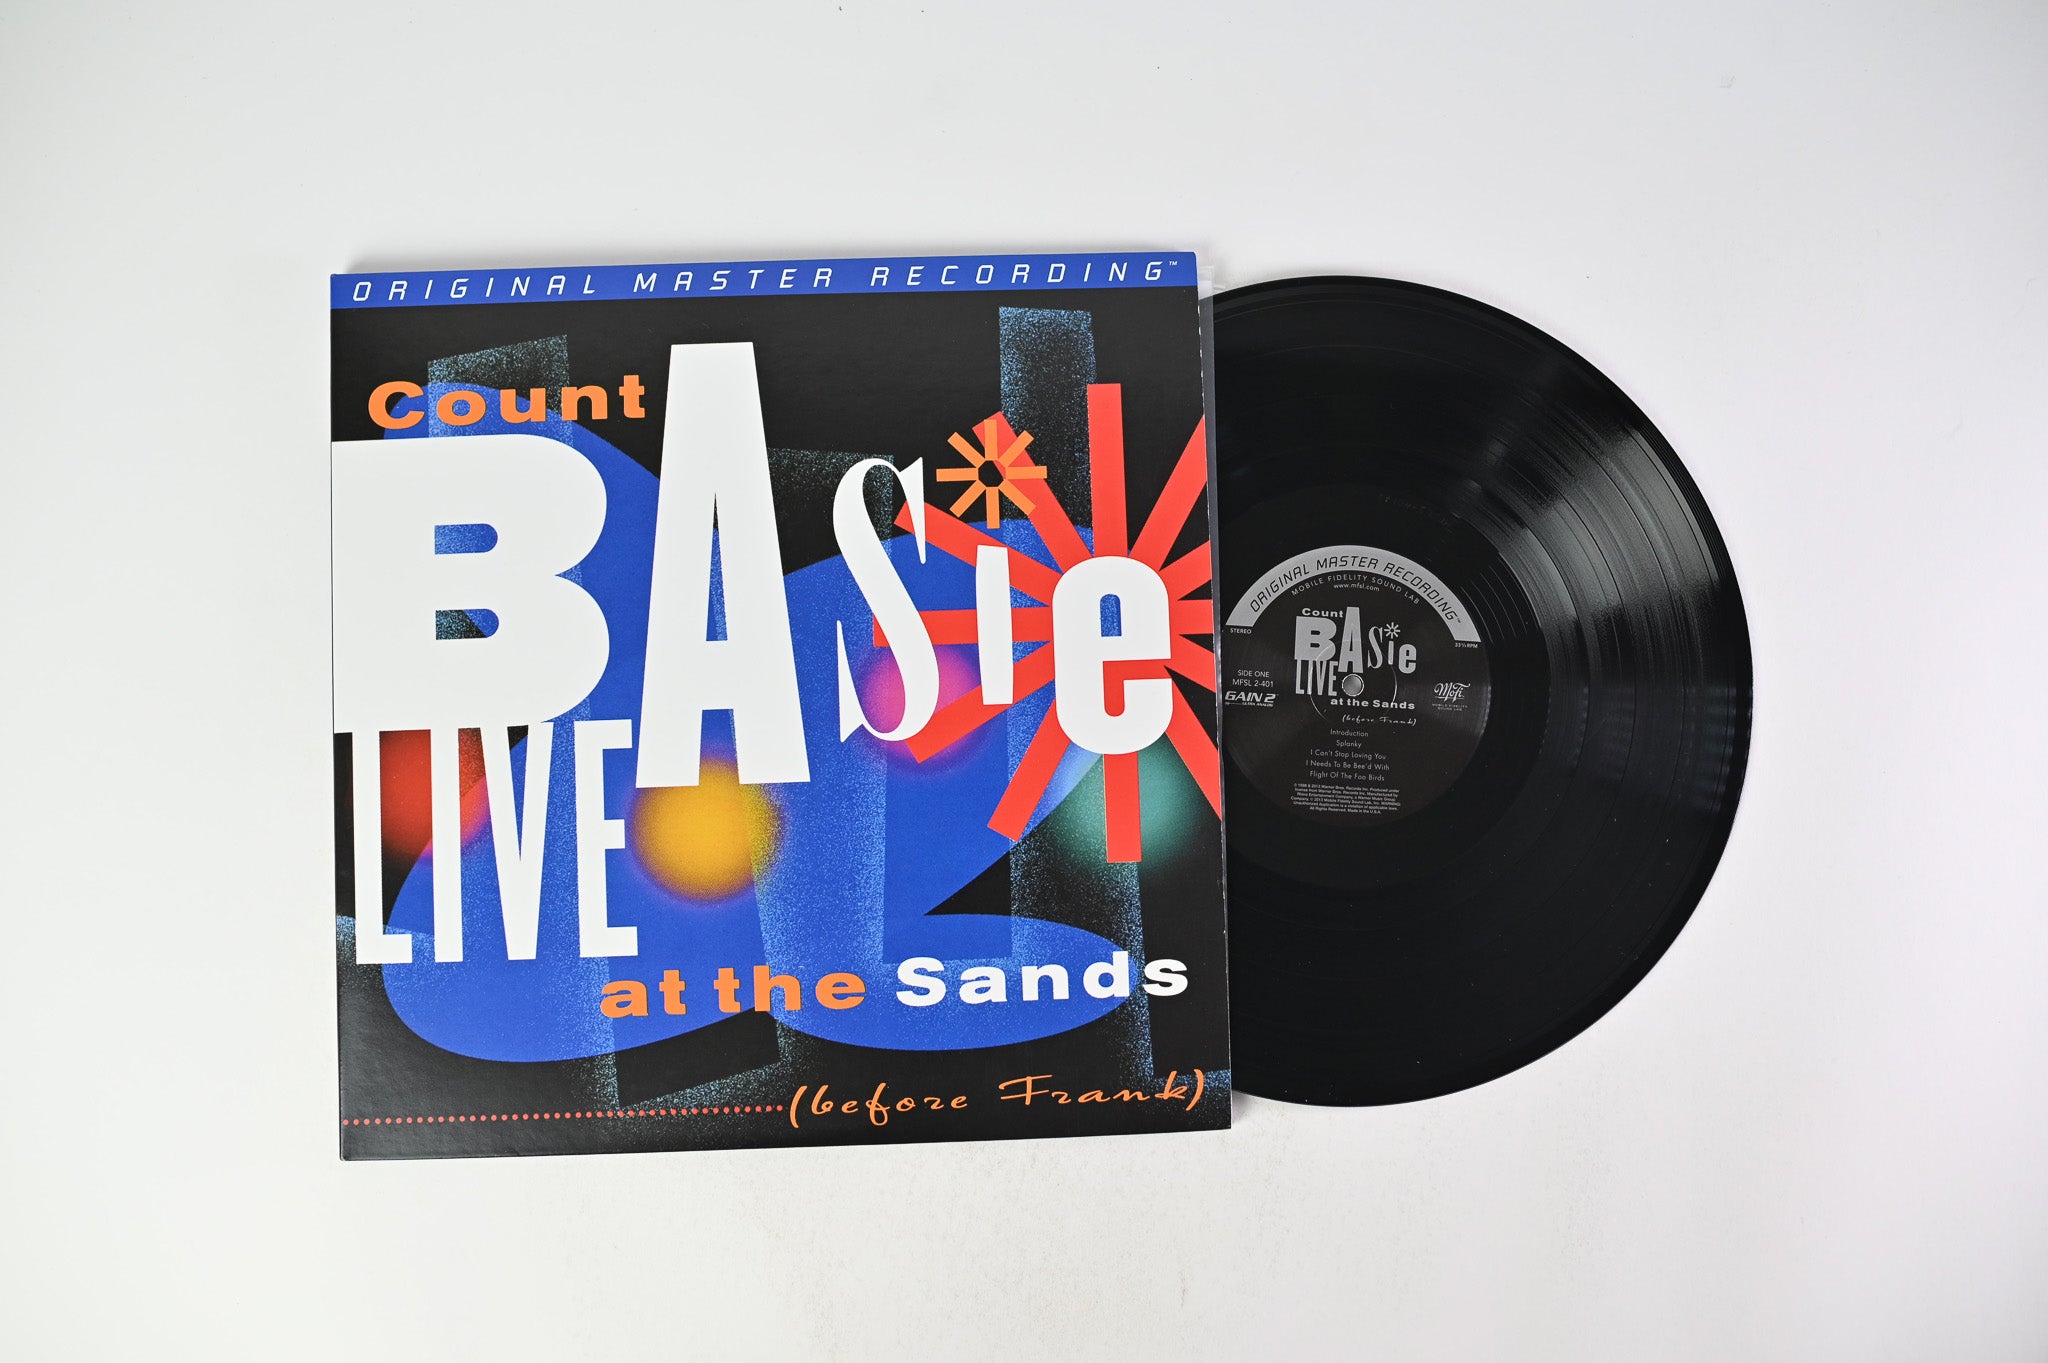 Count Basie - Live At The Sands (Before Frank) on Mobile Fidelity Sound Lab Ltd Numbered